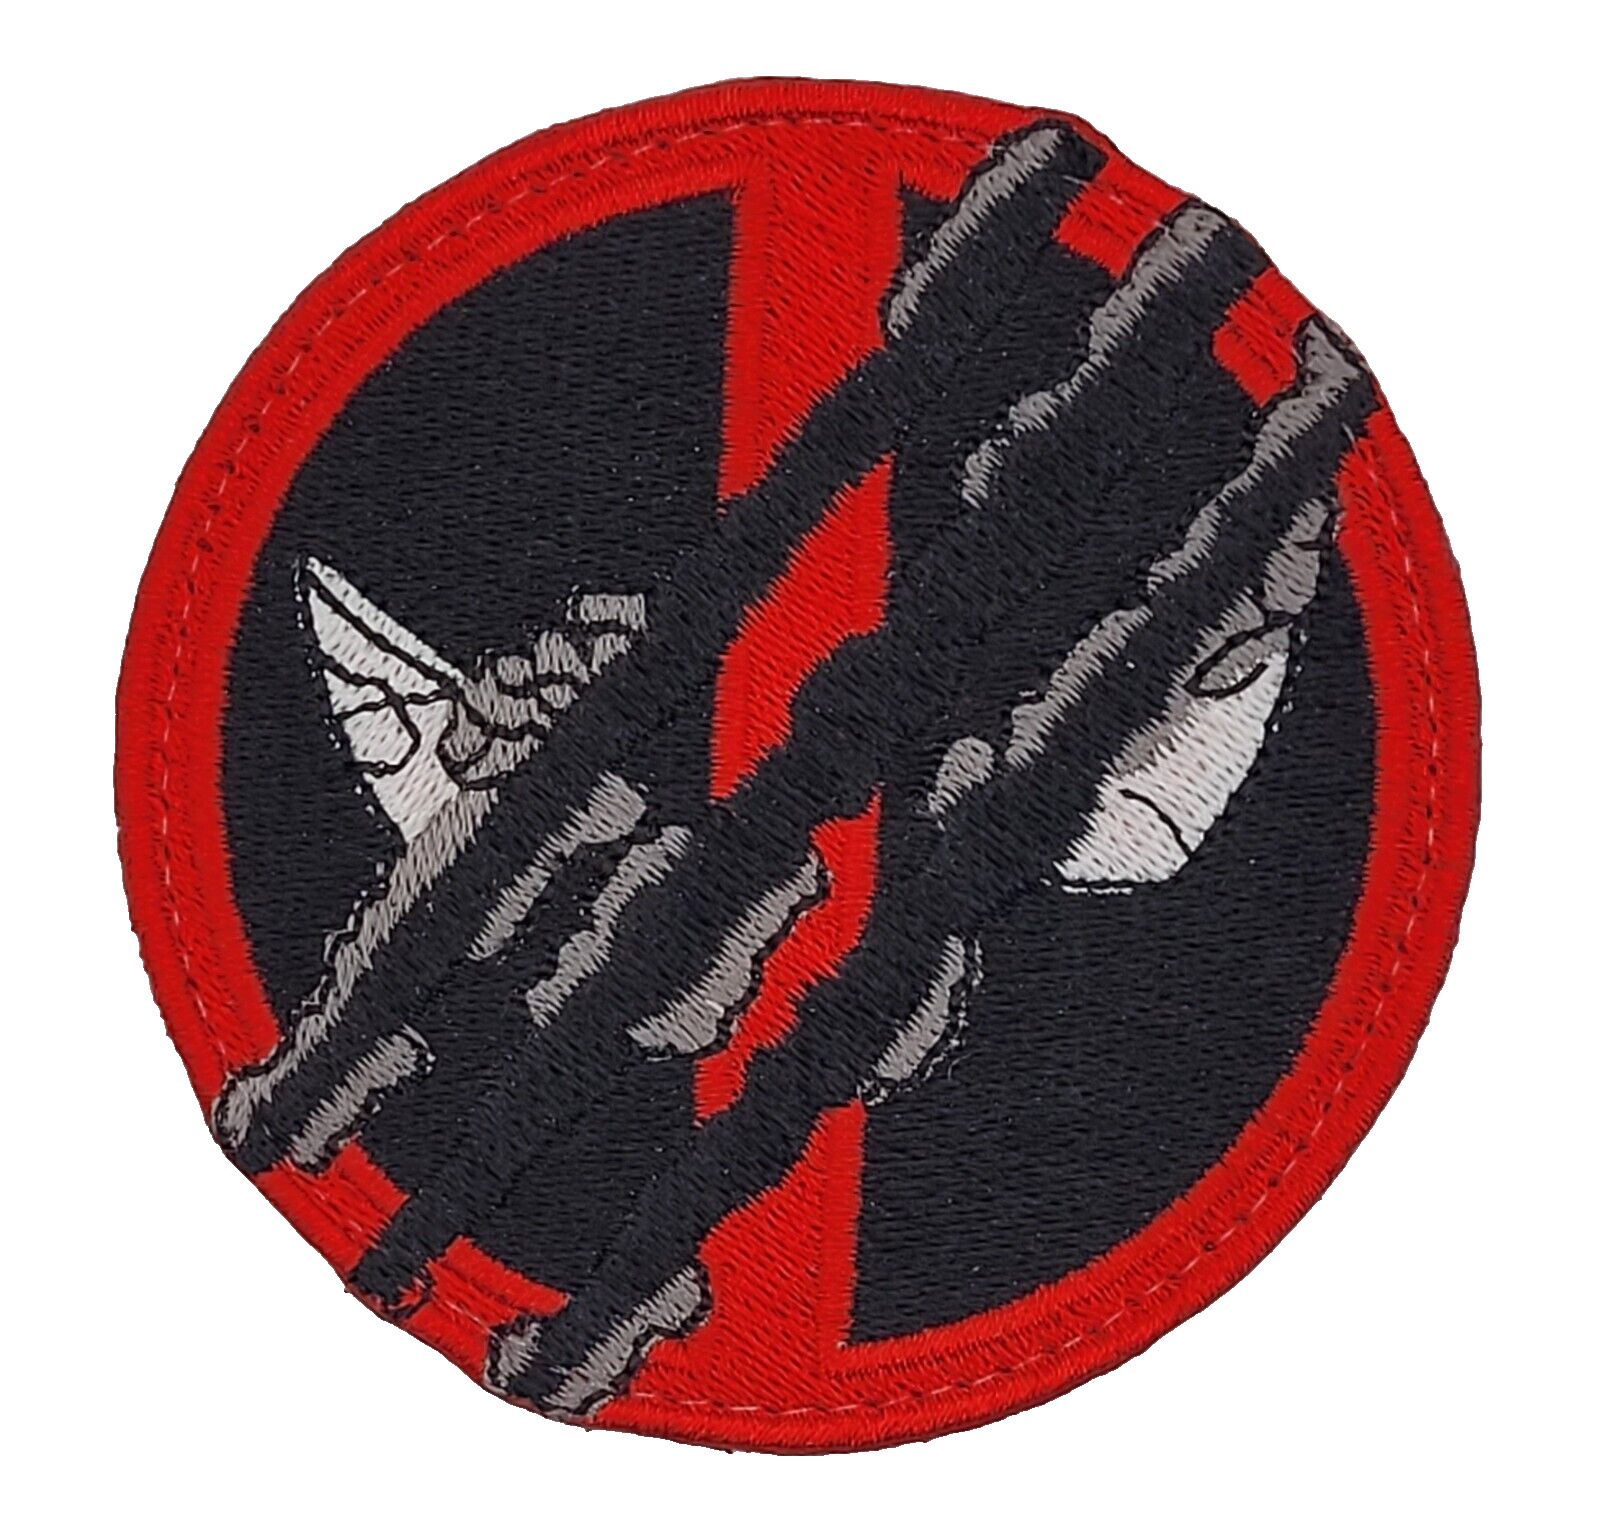 DEADPOOL 3 NEW EMBROIDERED HOOK PATCH 3.0 Inch 